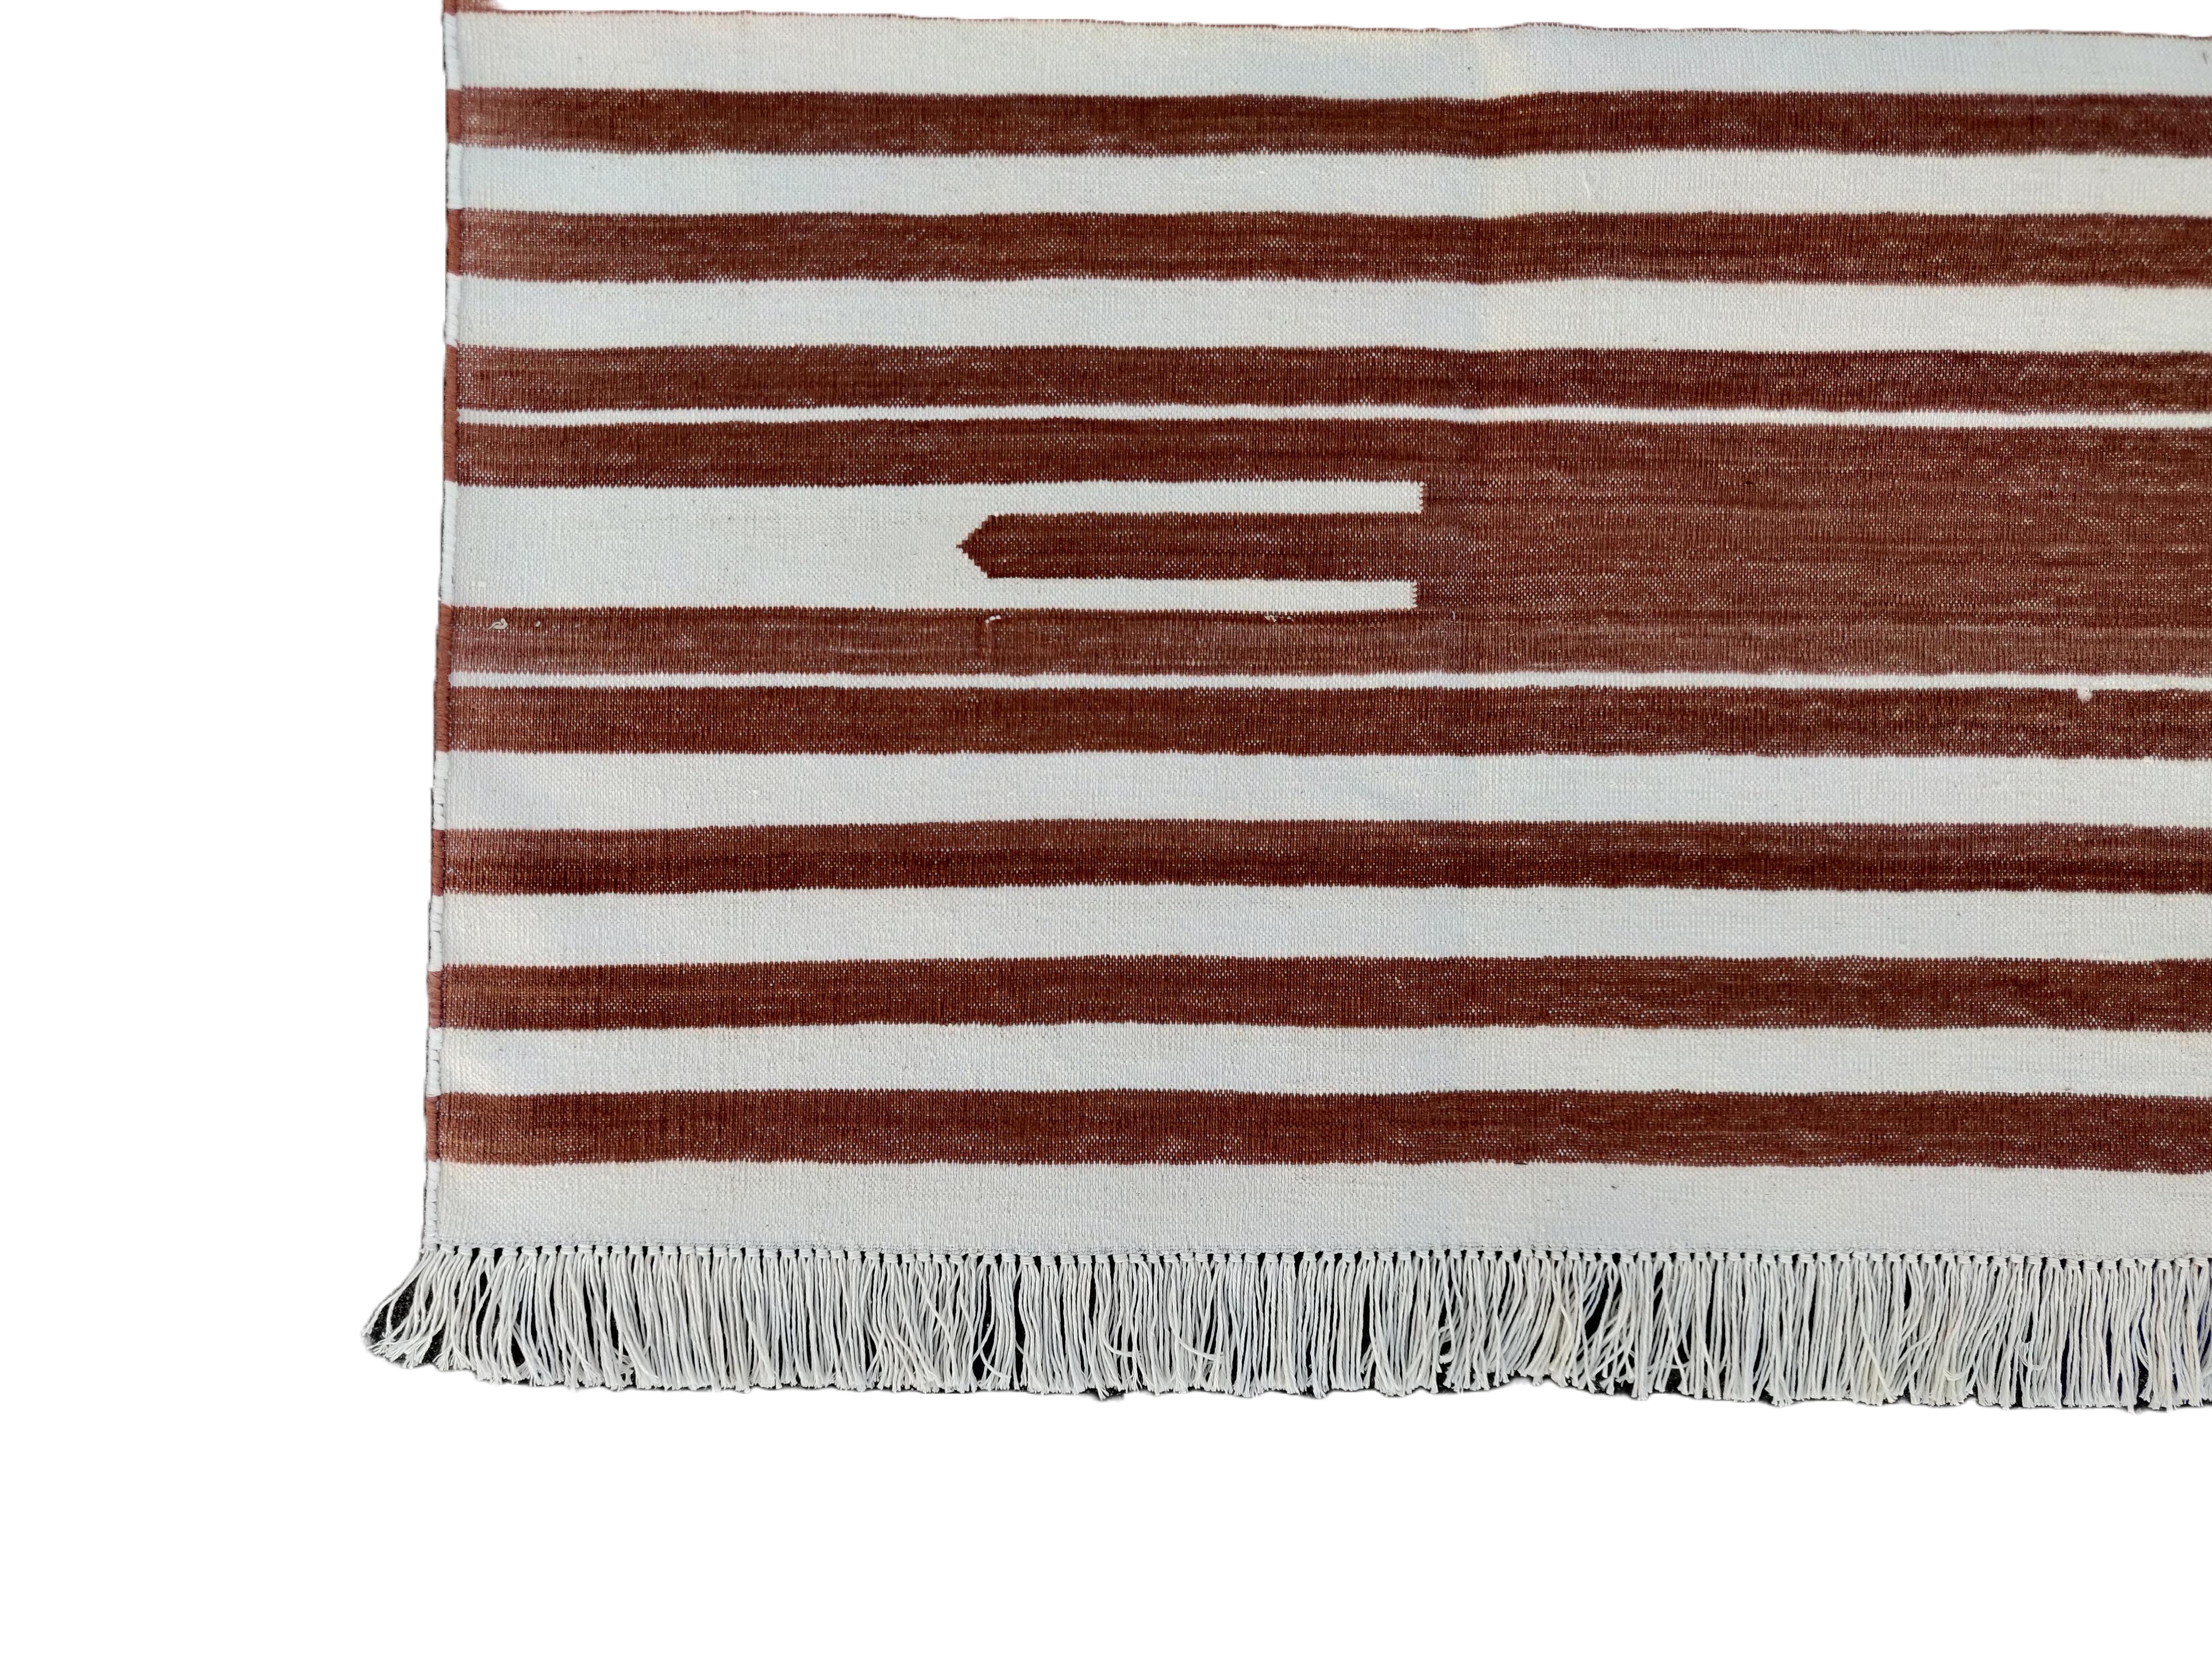 Contemporary Handmade Cotton Area Flat Weave Rug, 5x7 Tan And White Striped Indian Dhurrie For Sale